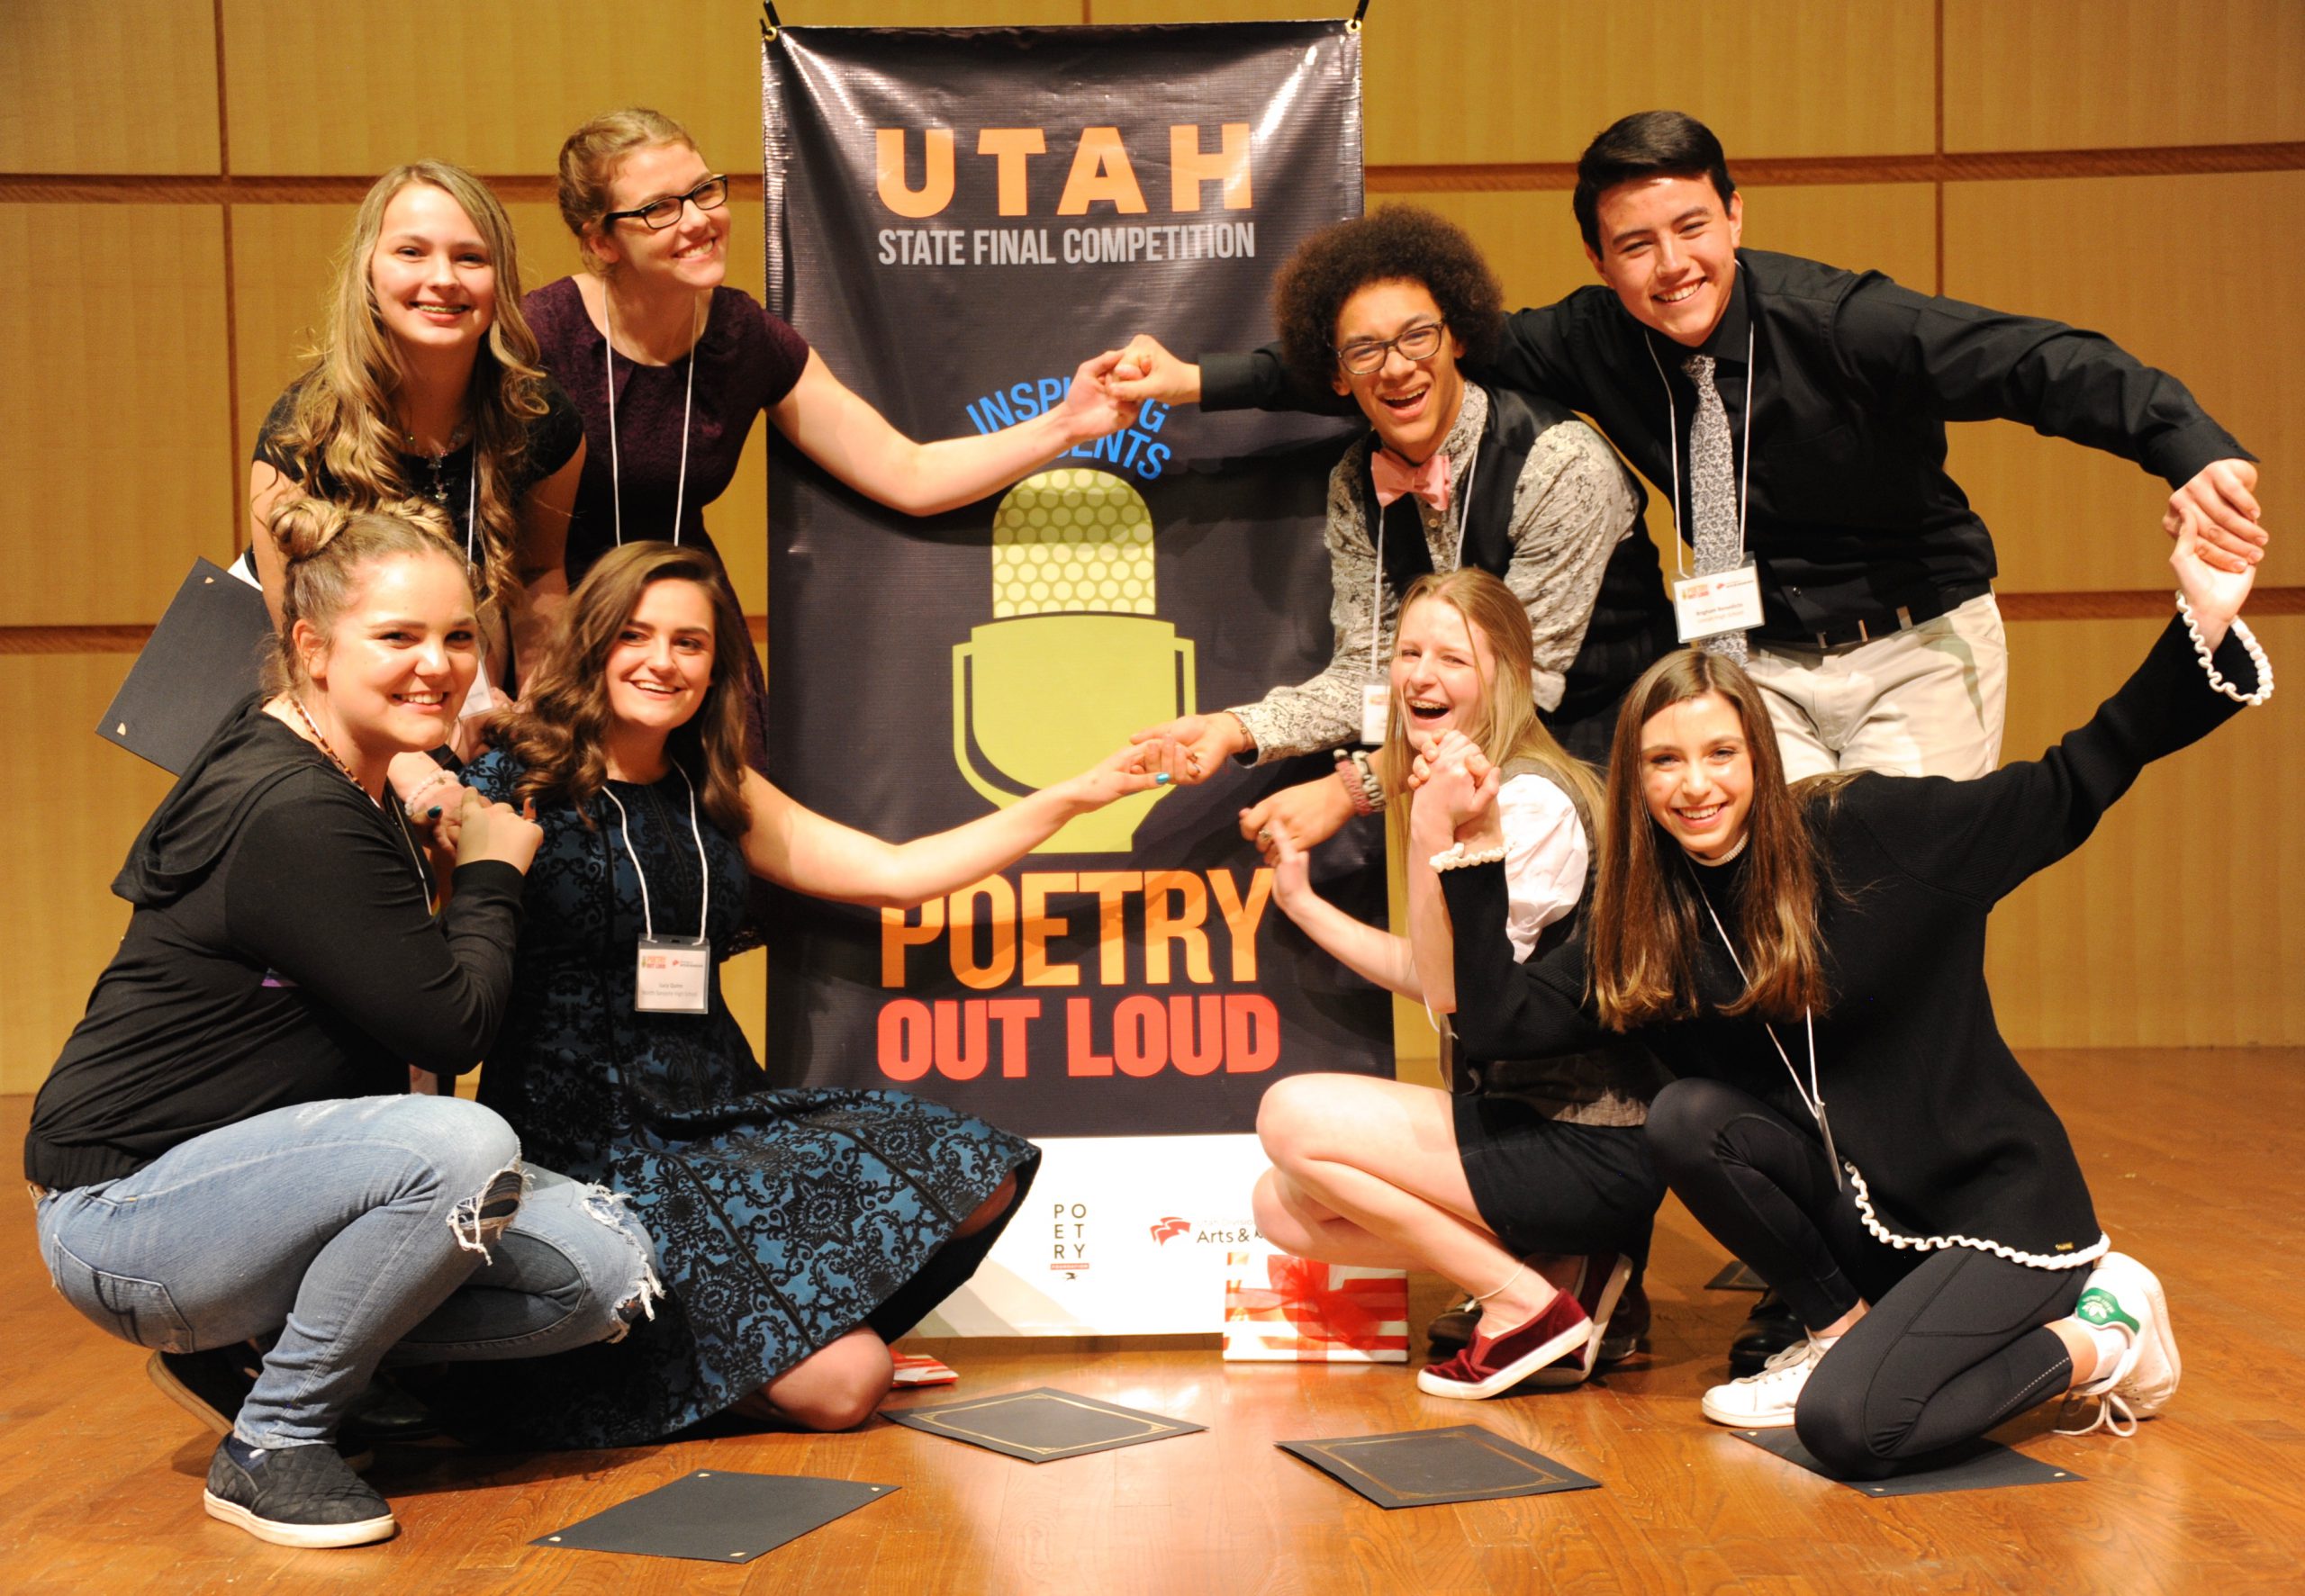 A group of students gather around a sign for Poetry Out Loud.